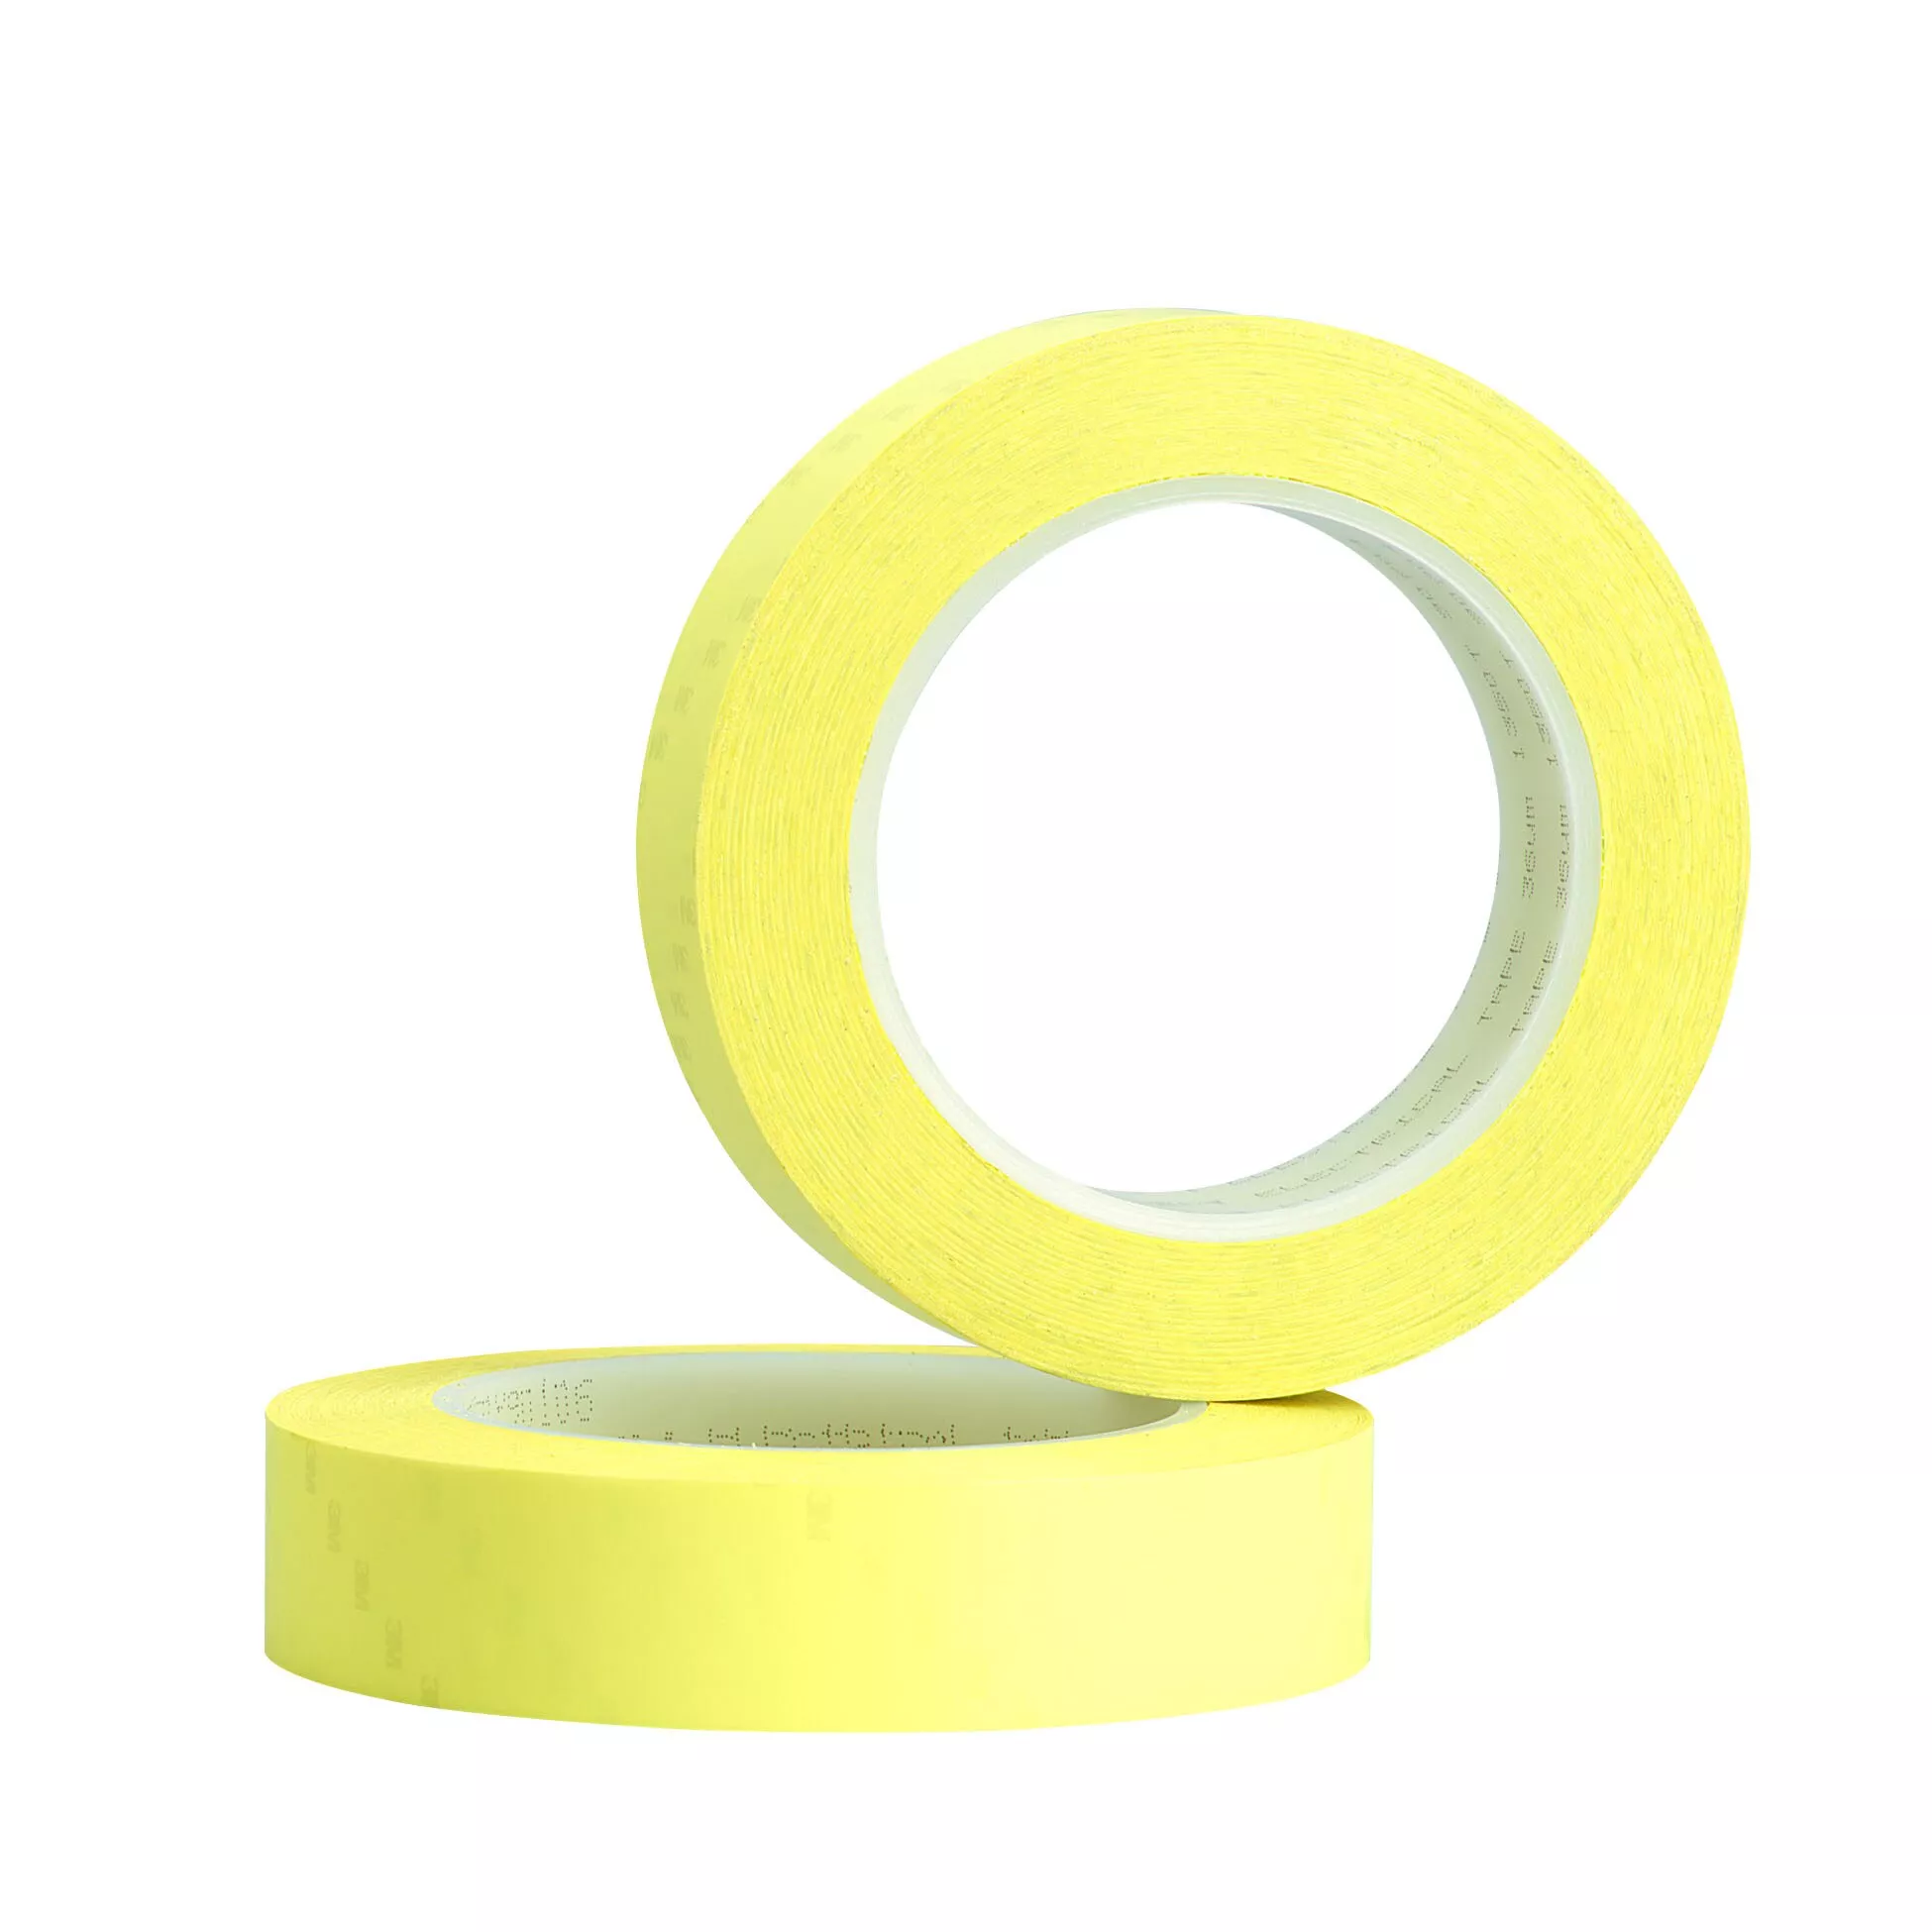 SKU 7010045330 | 3M™ Polyester Film Electrical Tape 74